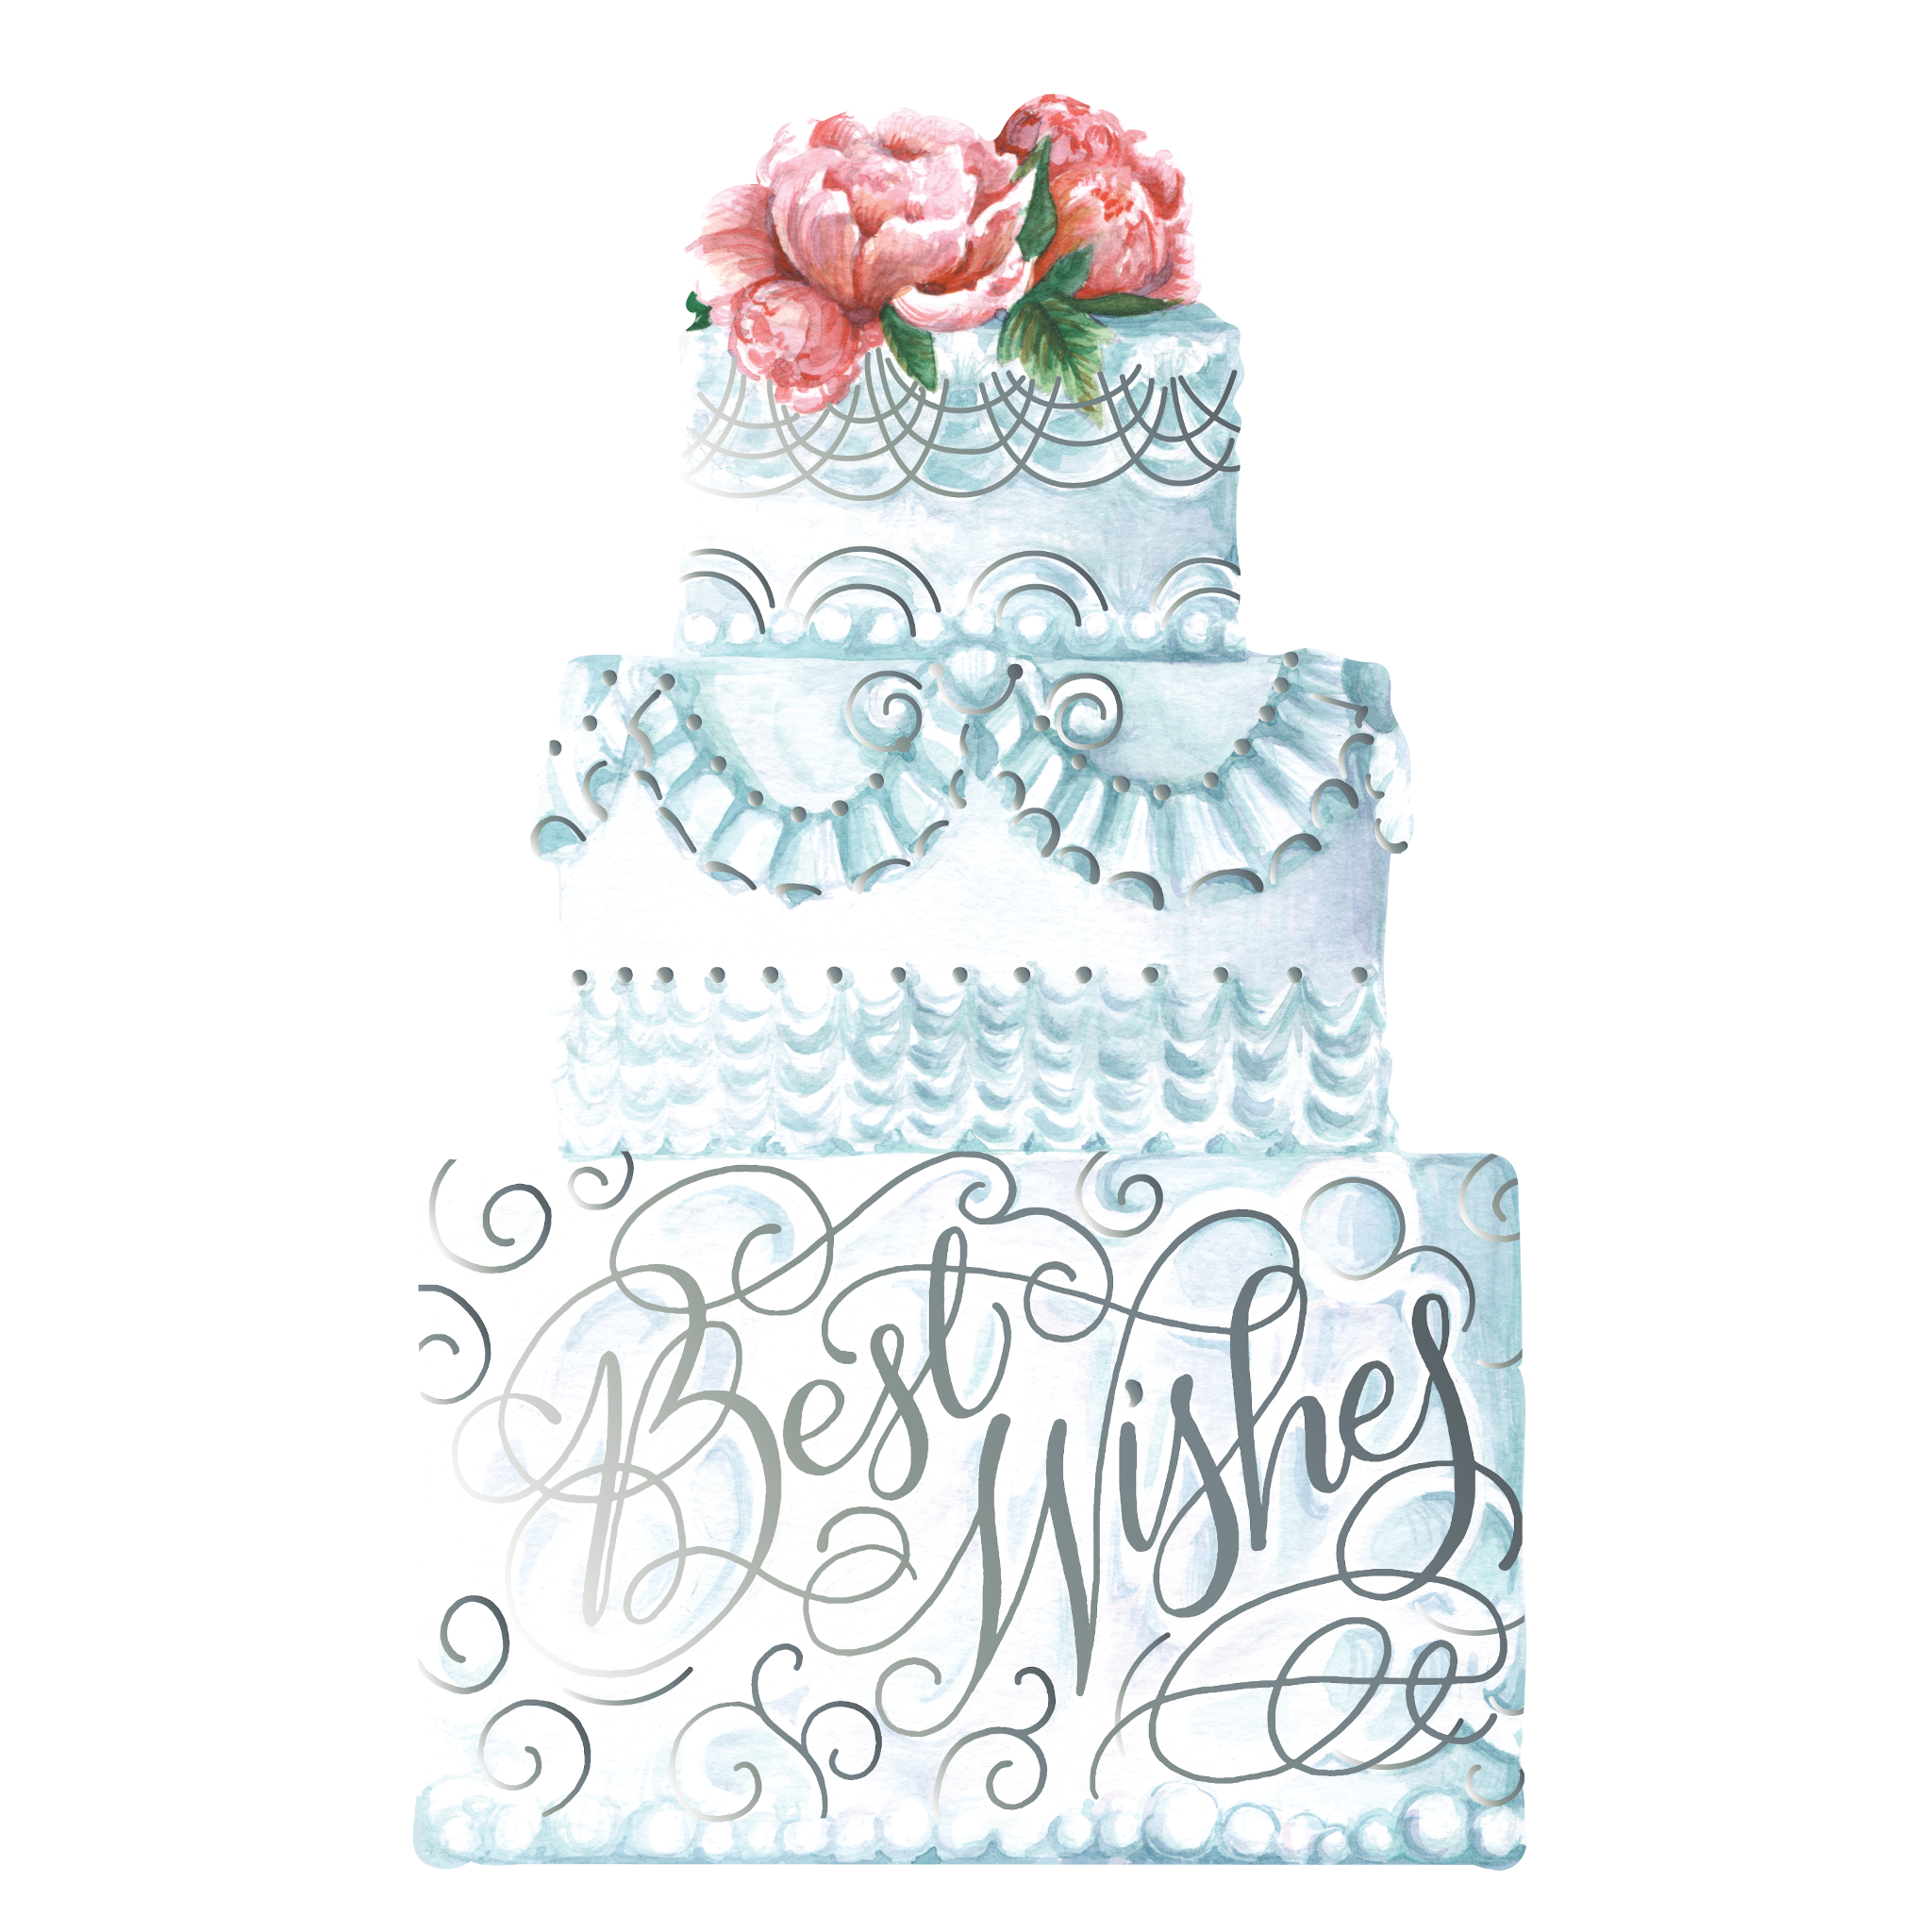 Best Wishes Cake Grand Flat Note